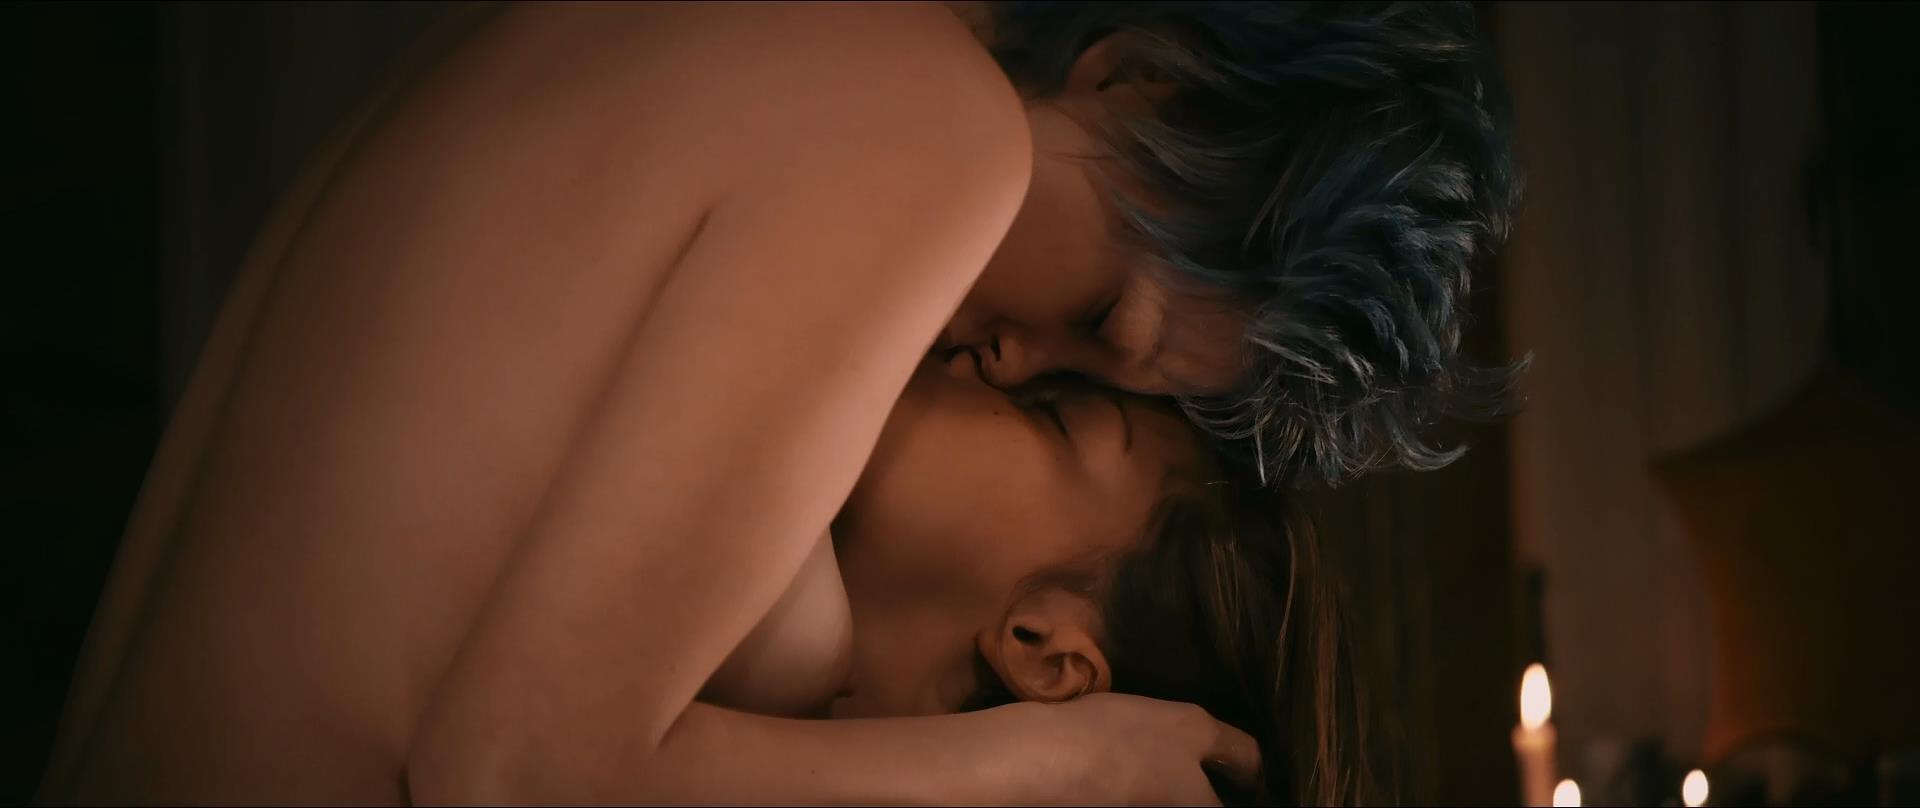 Blue Is the Warmest Colour nude pics.